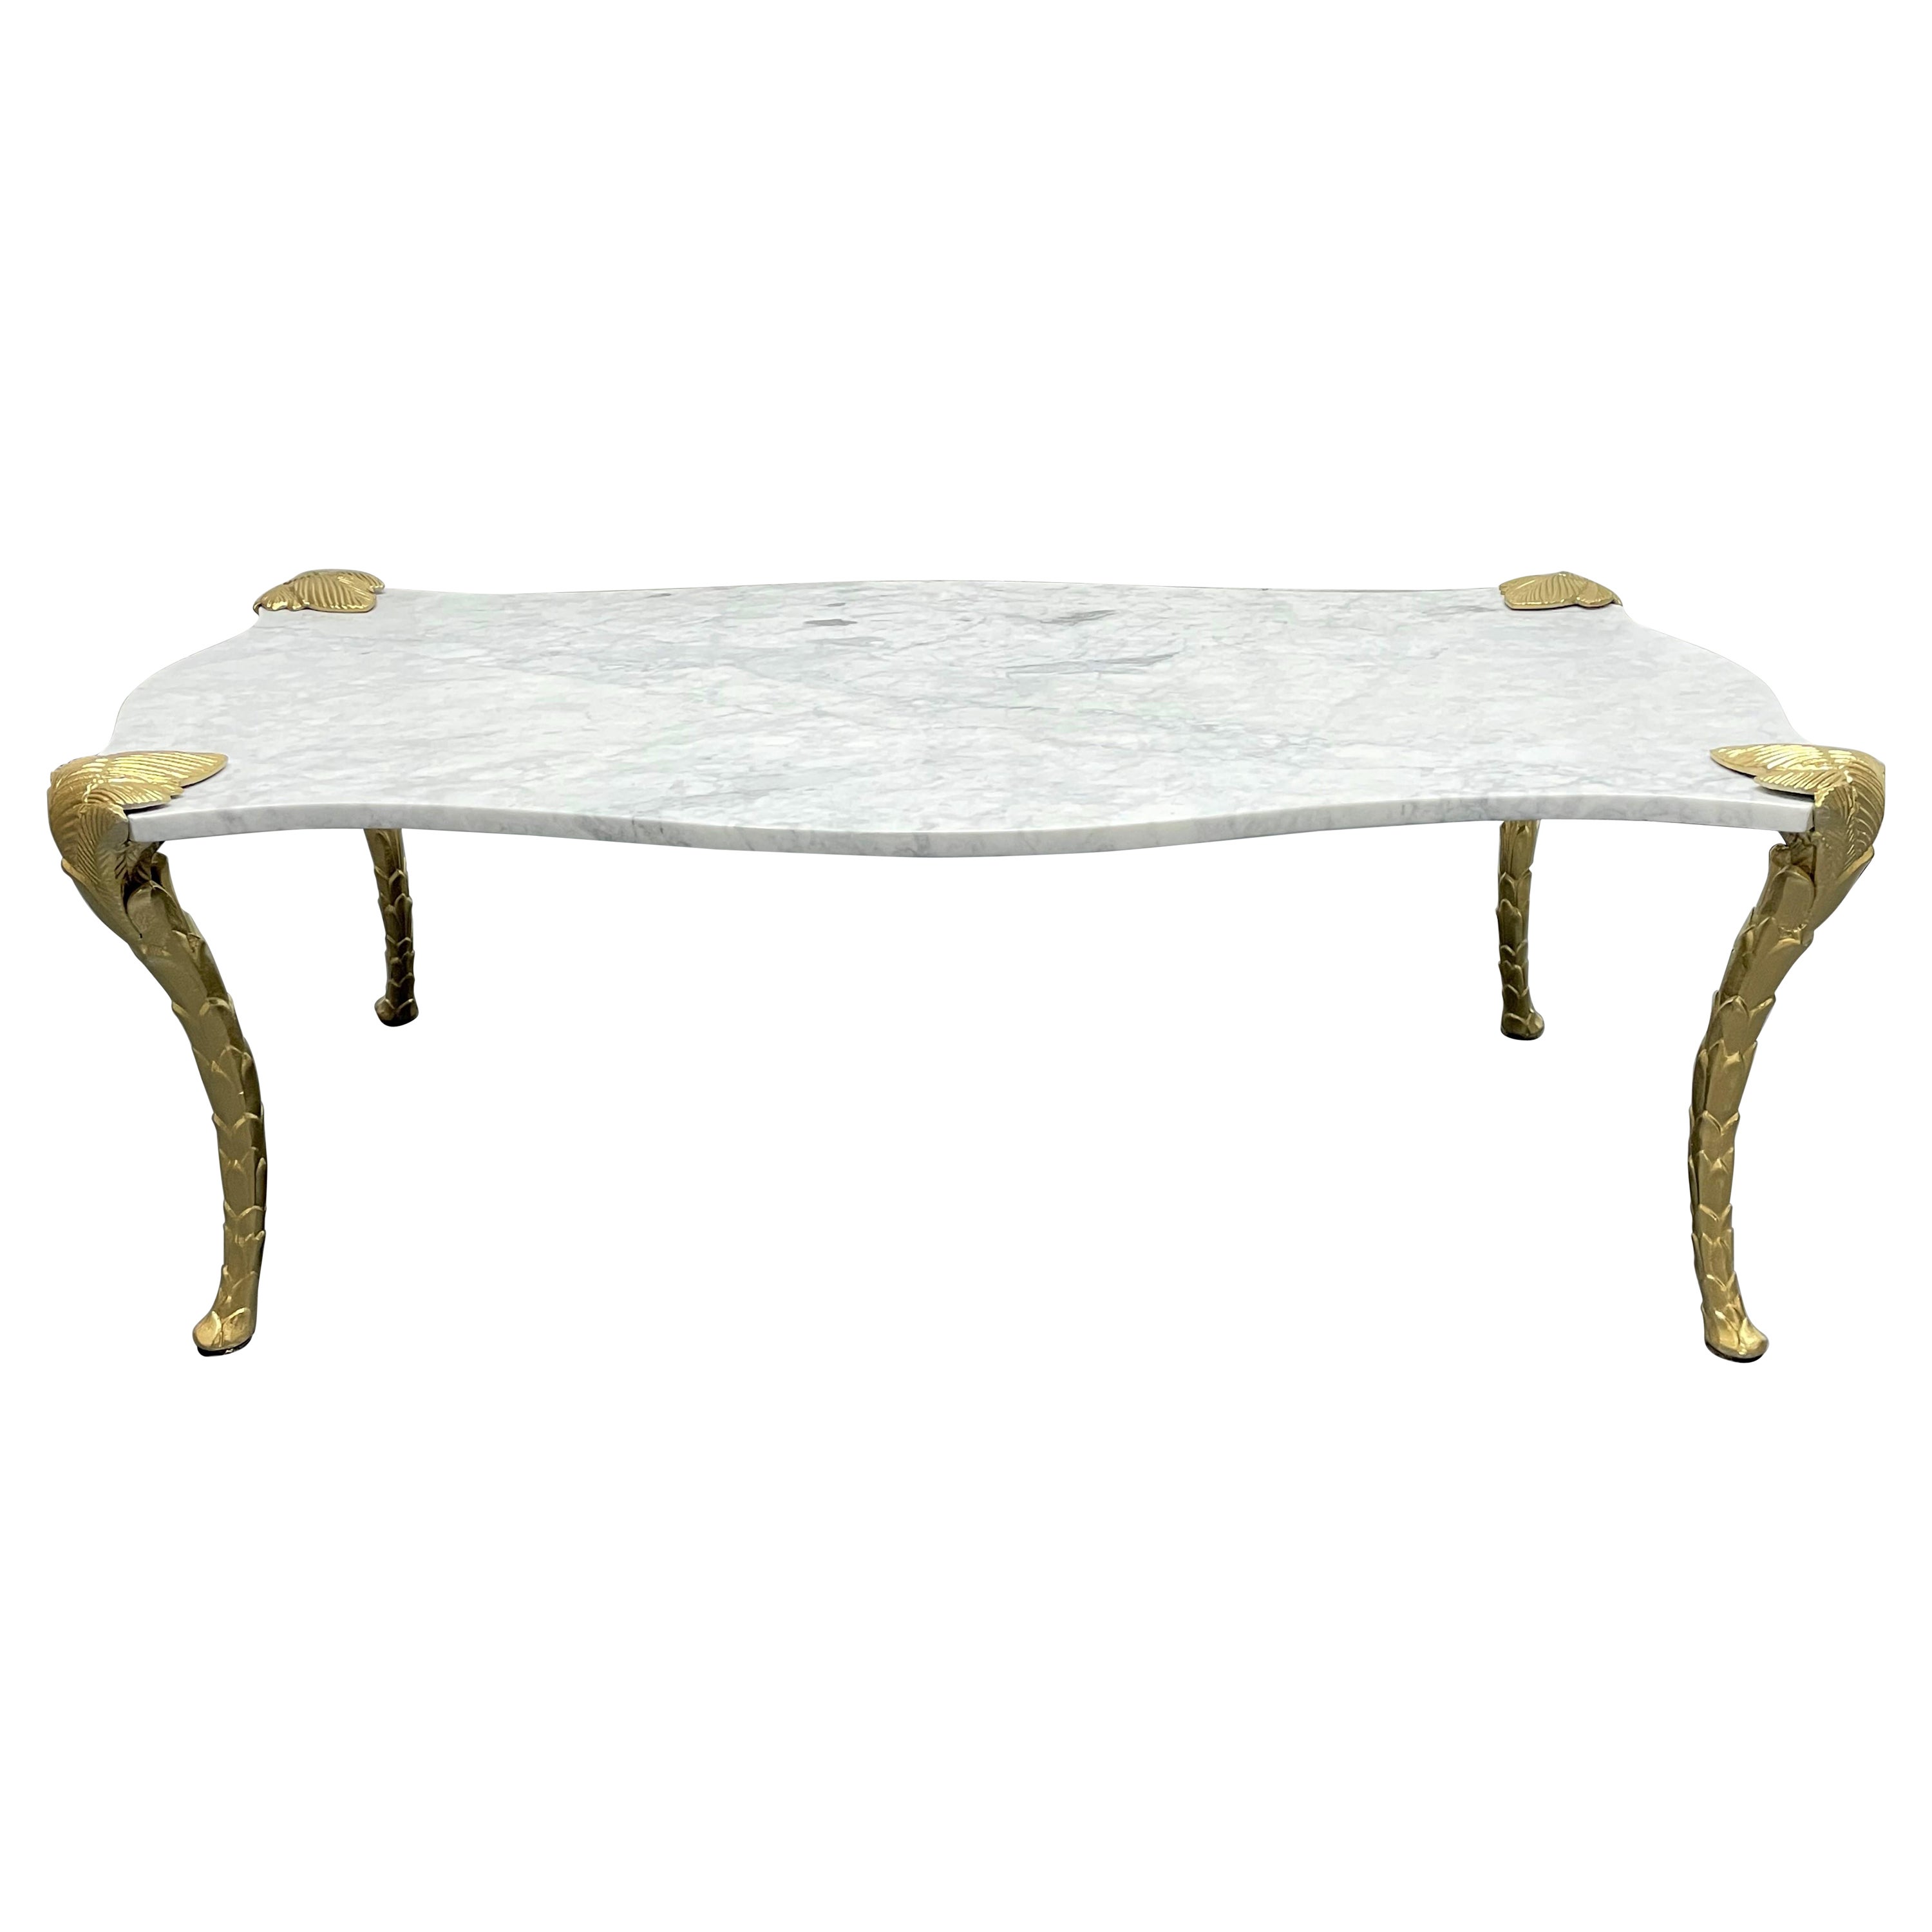 Decorative Carrara Marble Top Coffee Table with Floral Legs